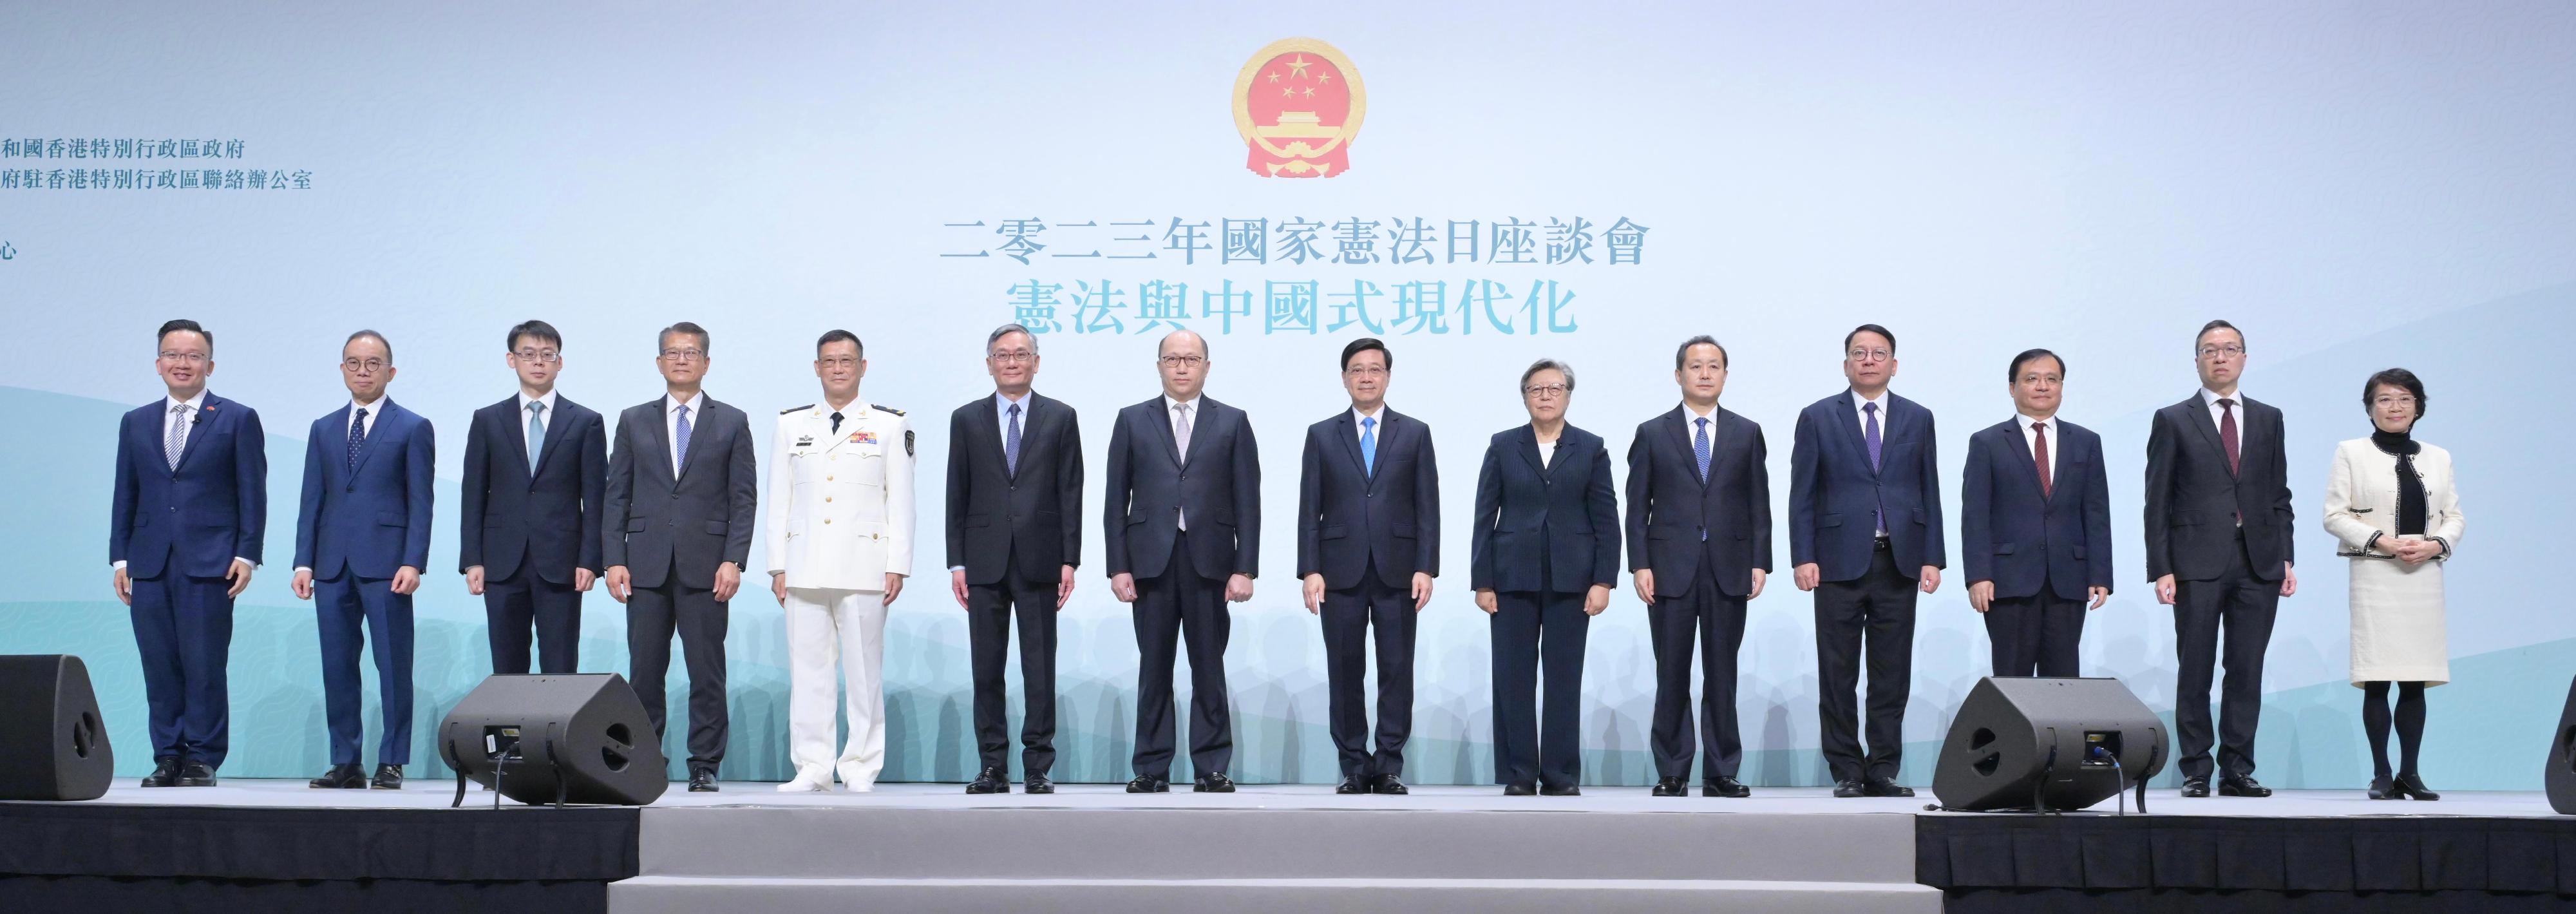 The Chief Executive, Mr John Lee, attended the 2023 Constitution Day Seminar today (December 4). Photo shows (from left) Hong Kong Special Administration Region (HKSAR) Deputy to the National People's Congress (NPC) Mr Nicholas Chan; the Secretary for Constitutional and Mainland Affairs, Mr Erick Tsang Kwok-wai; Professor of Peking University Law School Zhang Xiang; the Financial Secretary, Mr Paul Chan; Political Commissar of the Chinese People's Liberation Army Hong Kong Garrison, Navy Rear Admiral Lai Ruxin; the Chief Justice of the Court of Final Appeal, Mr Andrew Cheung Kui-nung; the Director of the Liaison Office of the Central People's Government in the HKSAR, Mr Zheng Yanxiong; Mr Lee; the Chairman of the Management Committee of the Endeavour Education Centre, Mrs Rita Fan; the Head of the Office for Safeguarding National Security of the Central People's Government in the HKSAR, Mr Dong Jingwei; the Chief Secretary for Administration, Mr Chan Kwok-ki; Deputy Commissioner of the Office of the Commissioner of the Ministry of Foreign Affairs of the People's Republic of China in the HKSAR Mr Fang Jianming; the Secretary for Justice, Mr Paul Lam, SC; and member of the HKSAR Basic Law Committee of the Standing Committee of the NPC and member of the Legislative Council, Professor Priscilla Leung at the seminar.